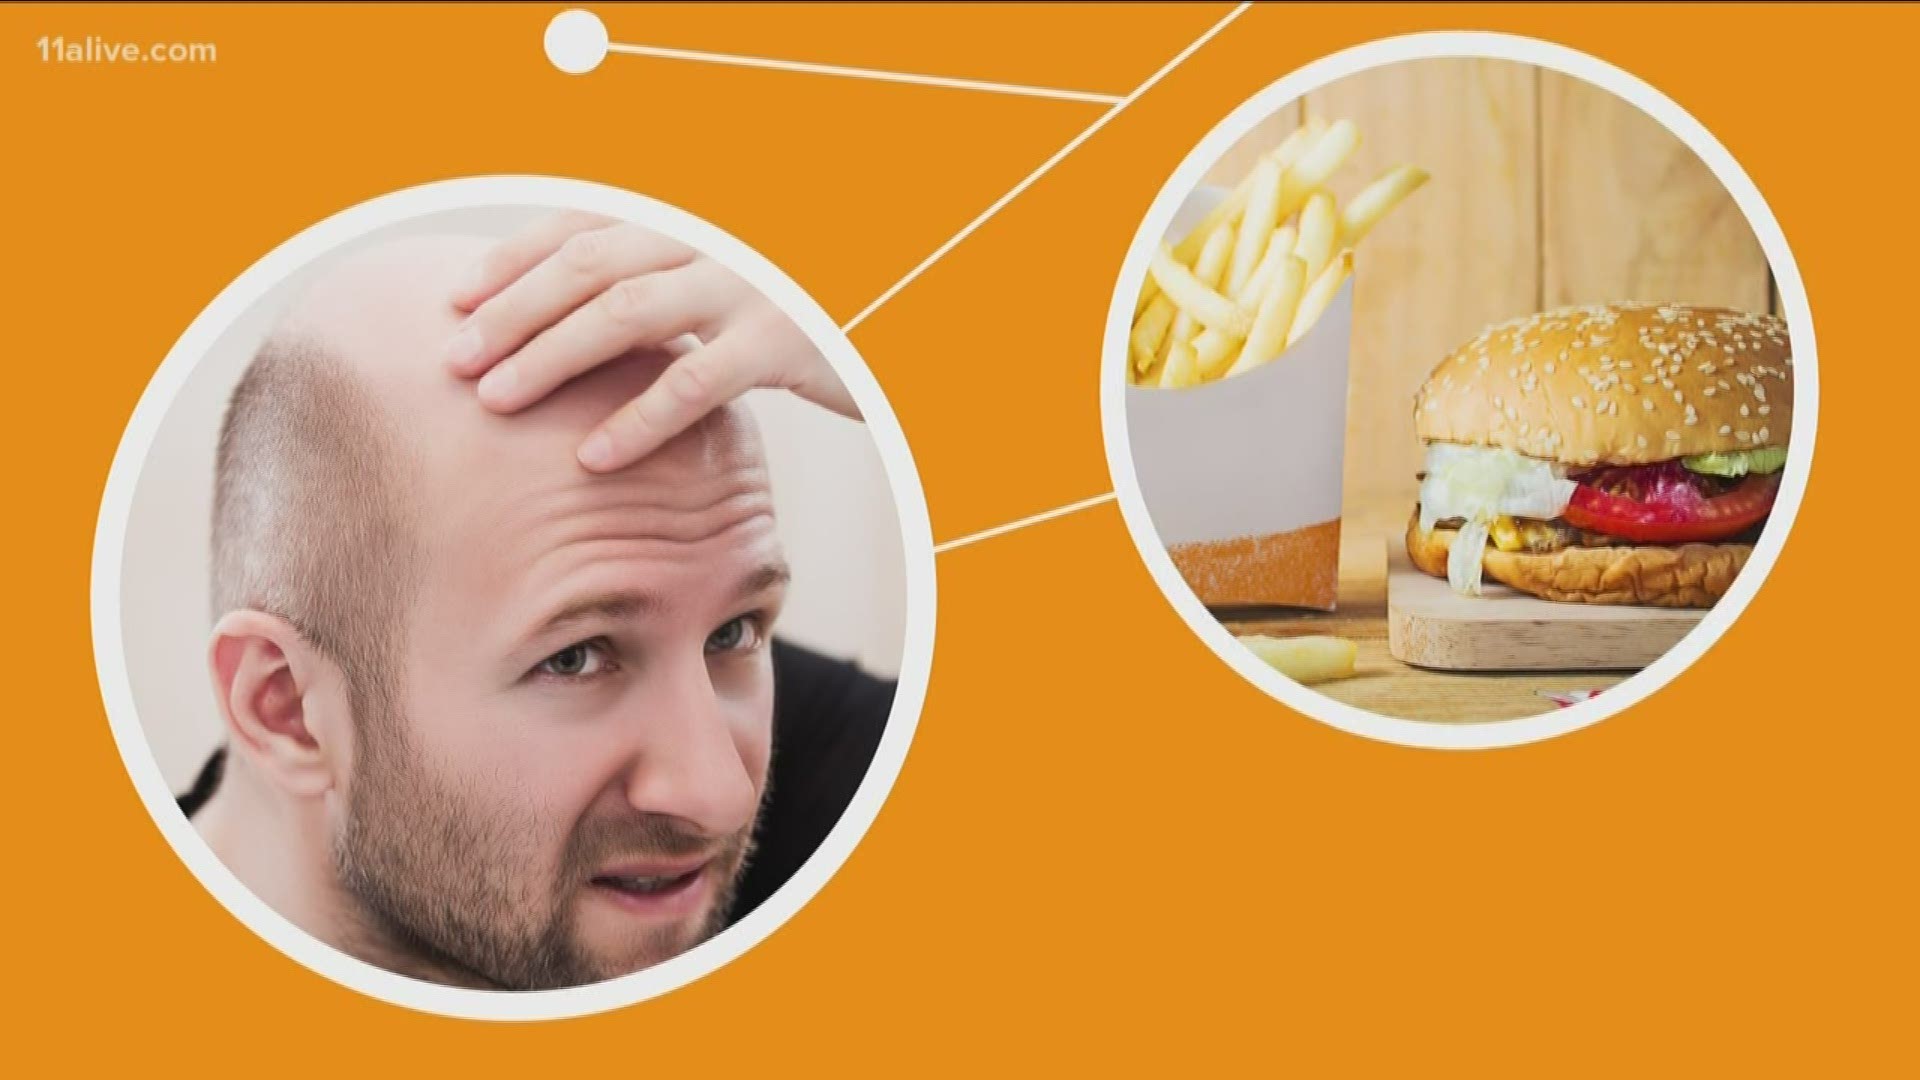 Fast food may add some inches around your waistline, but can it also cure baldness? Jerry Carnes connects the dots.